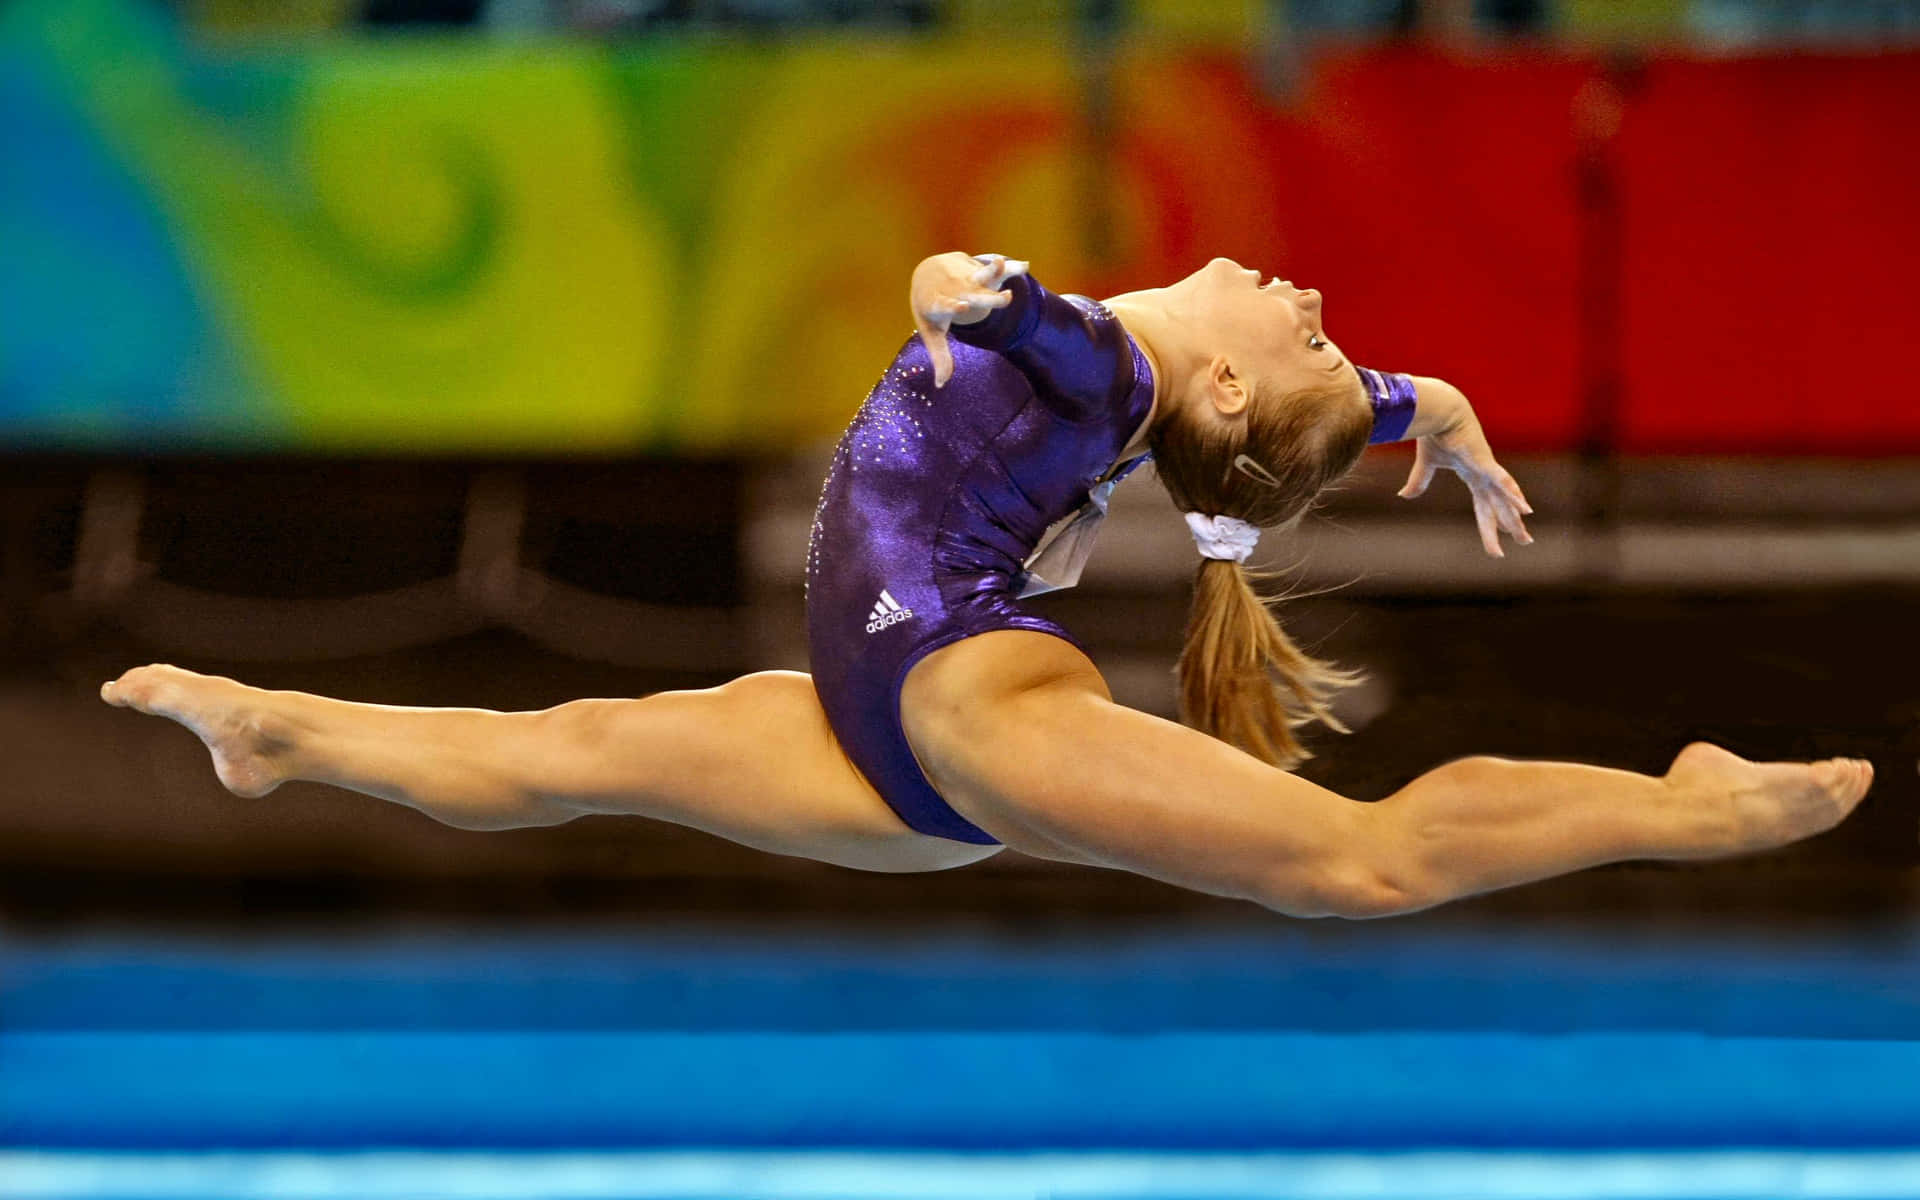 A gymnast gracefully performing her routine on the balance beam